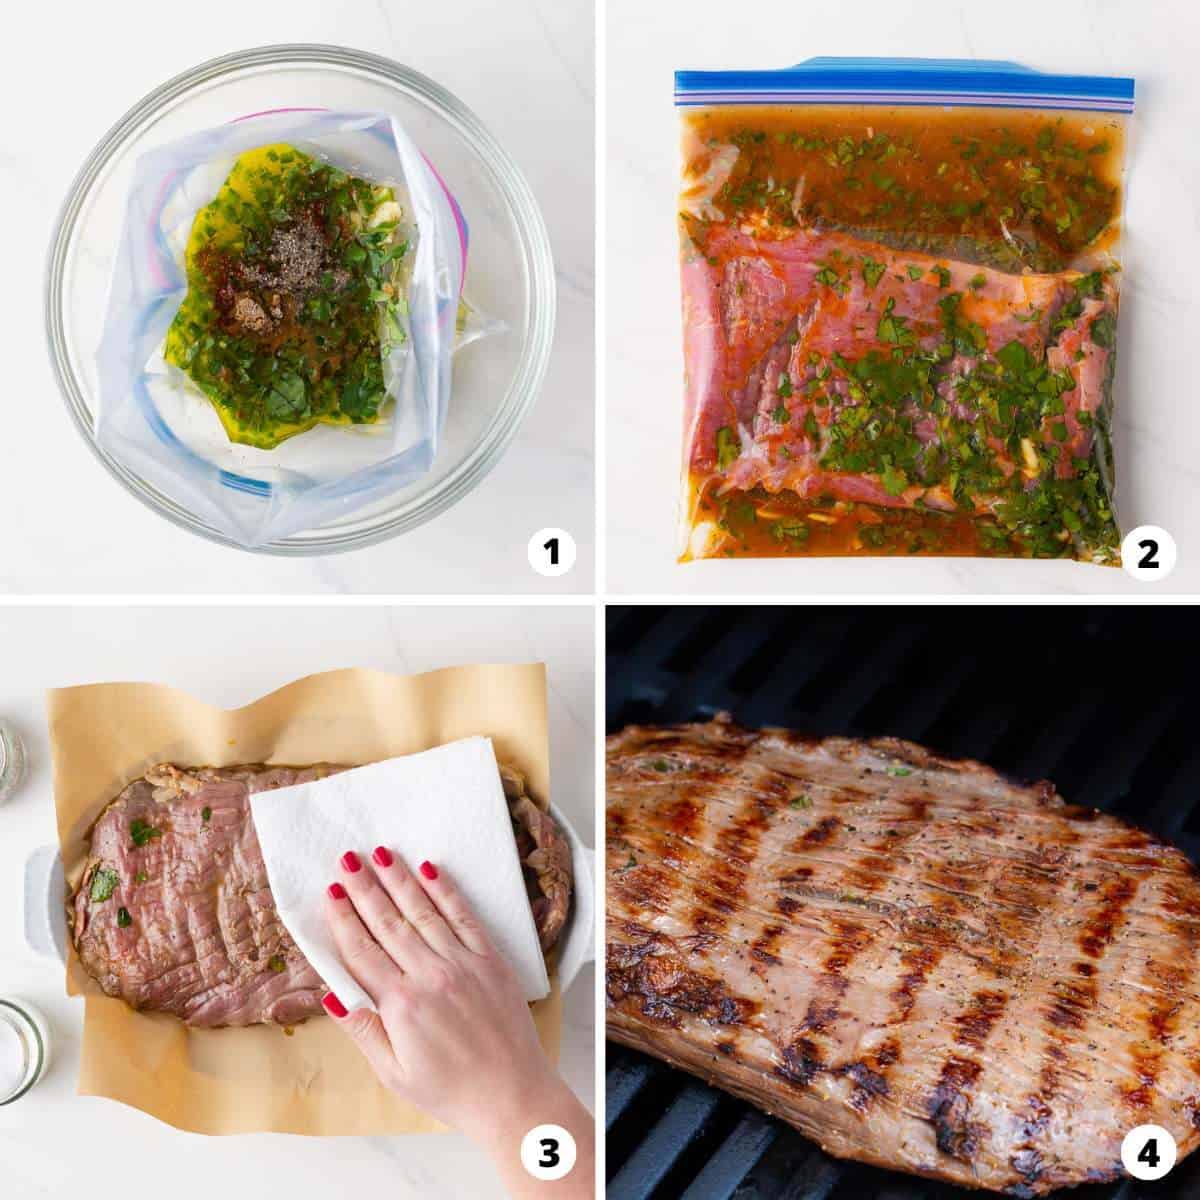 Showing how to make carne asada marinade in a 4 step collage.